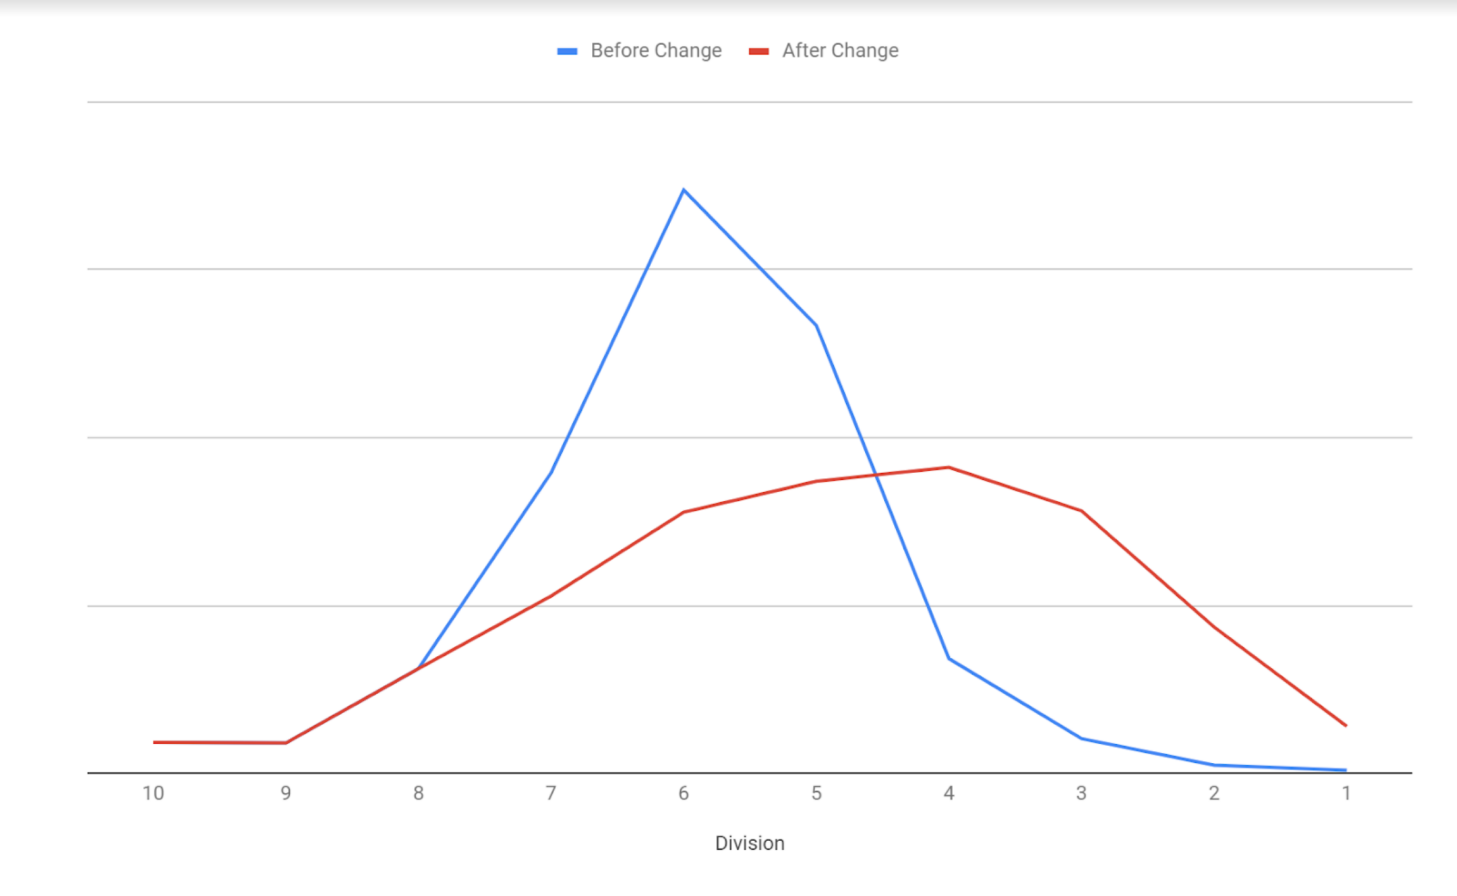 division-rivals-graph.png.adapt.1456w.png